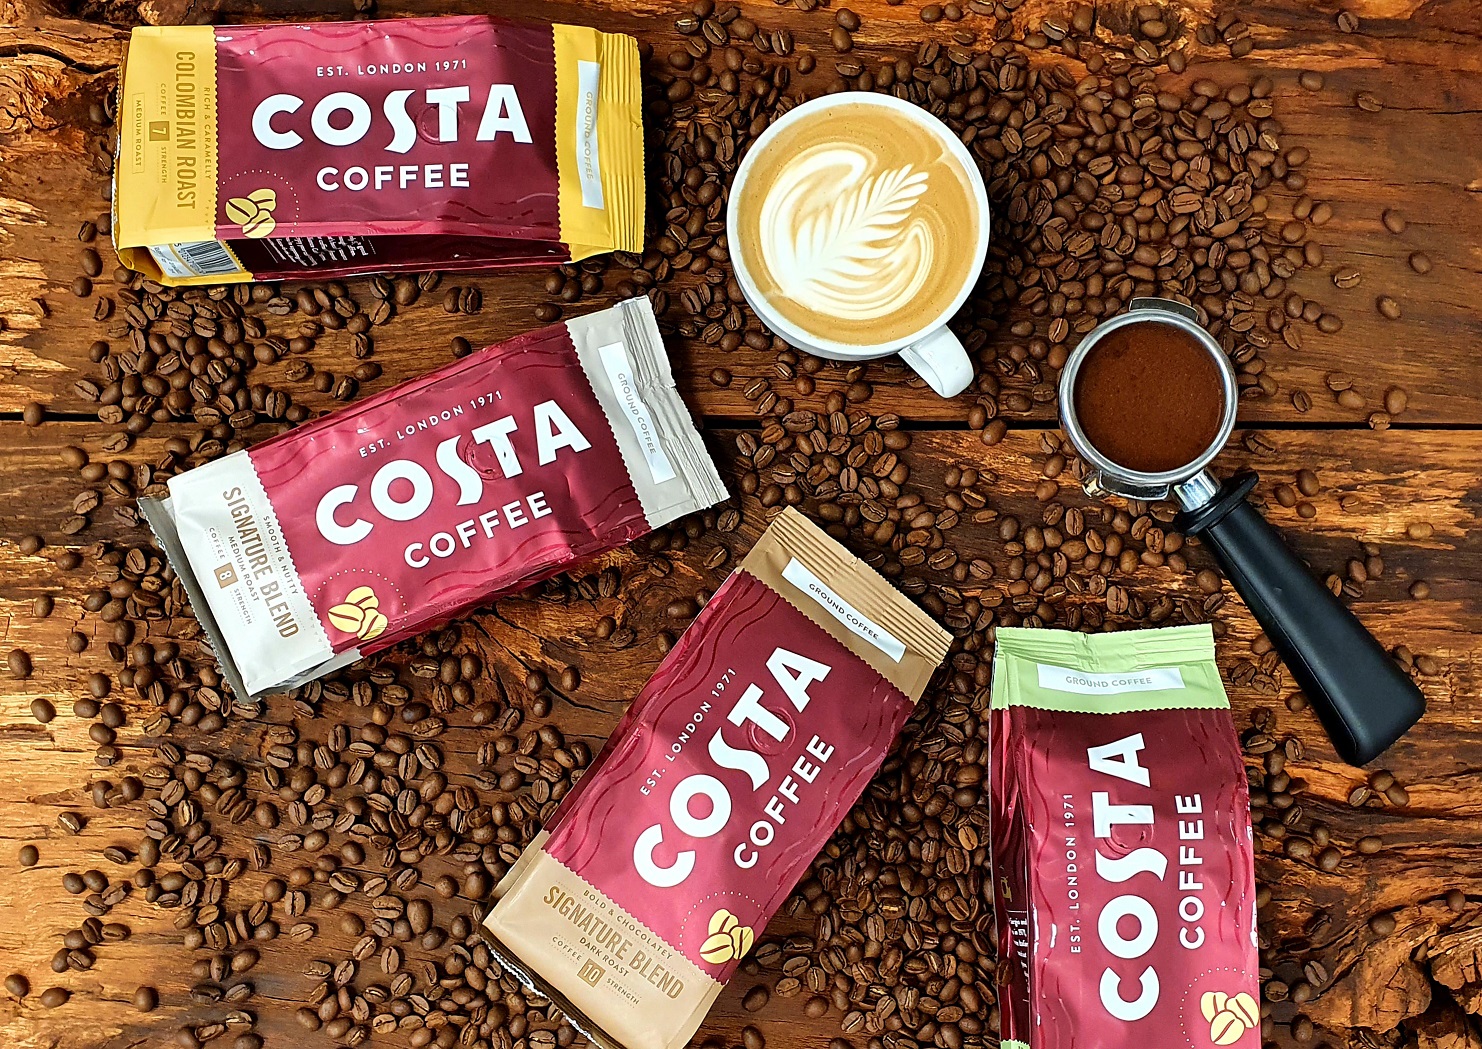 Coca-Cola launches new range of at-home Costa Coffee products